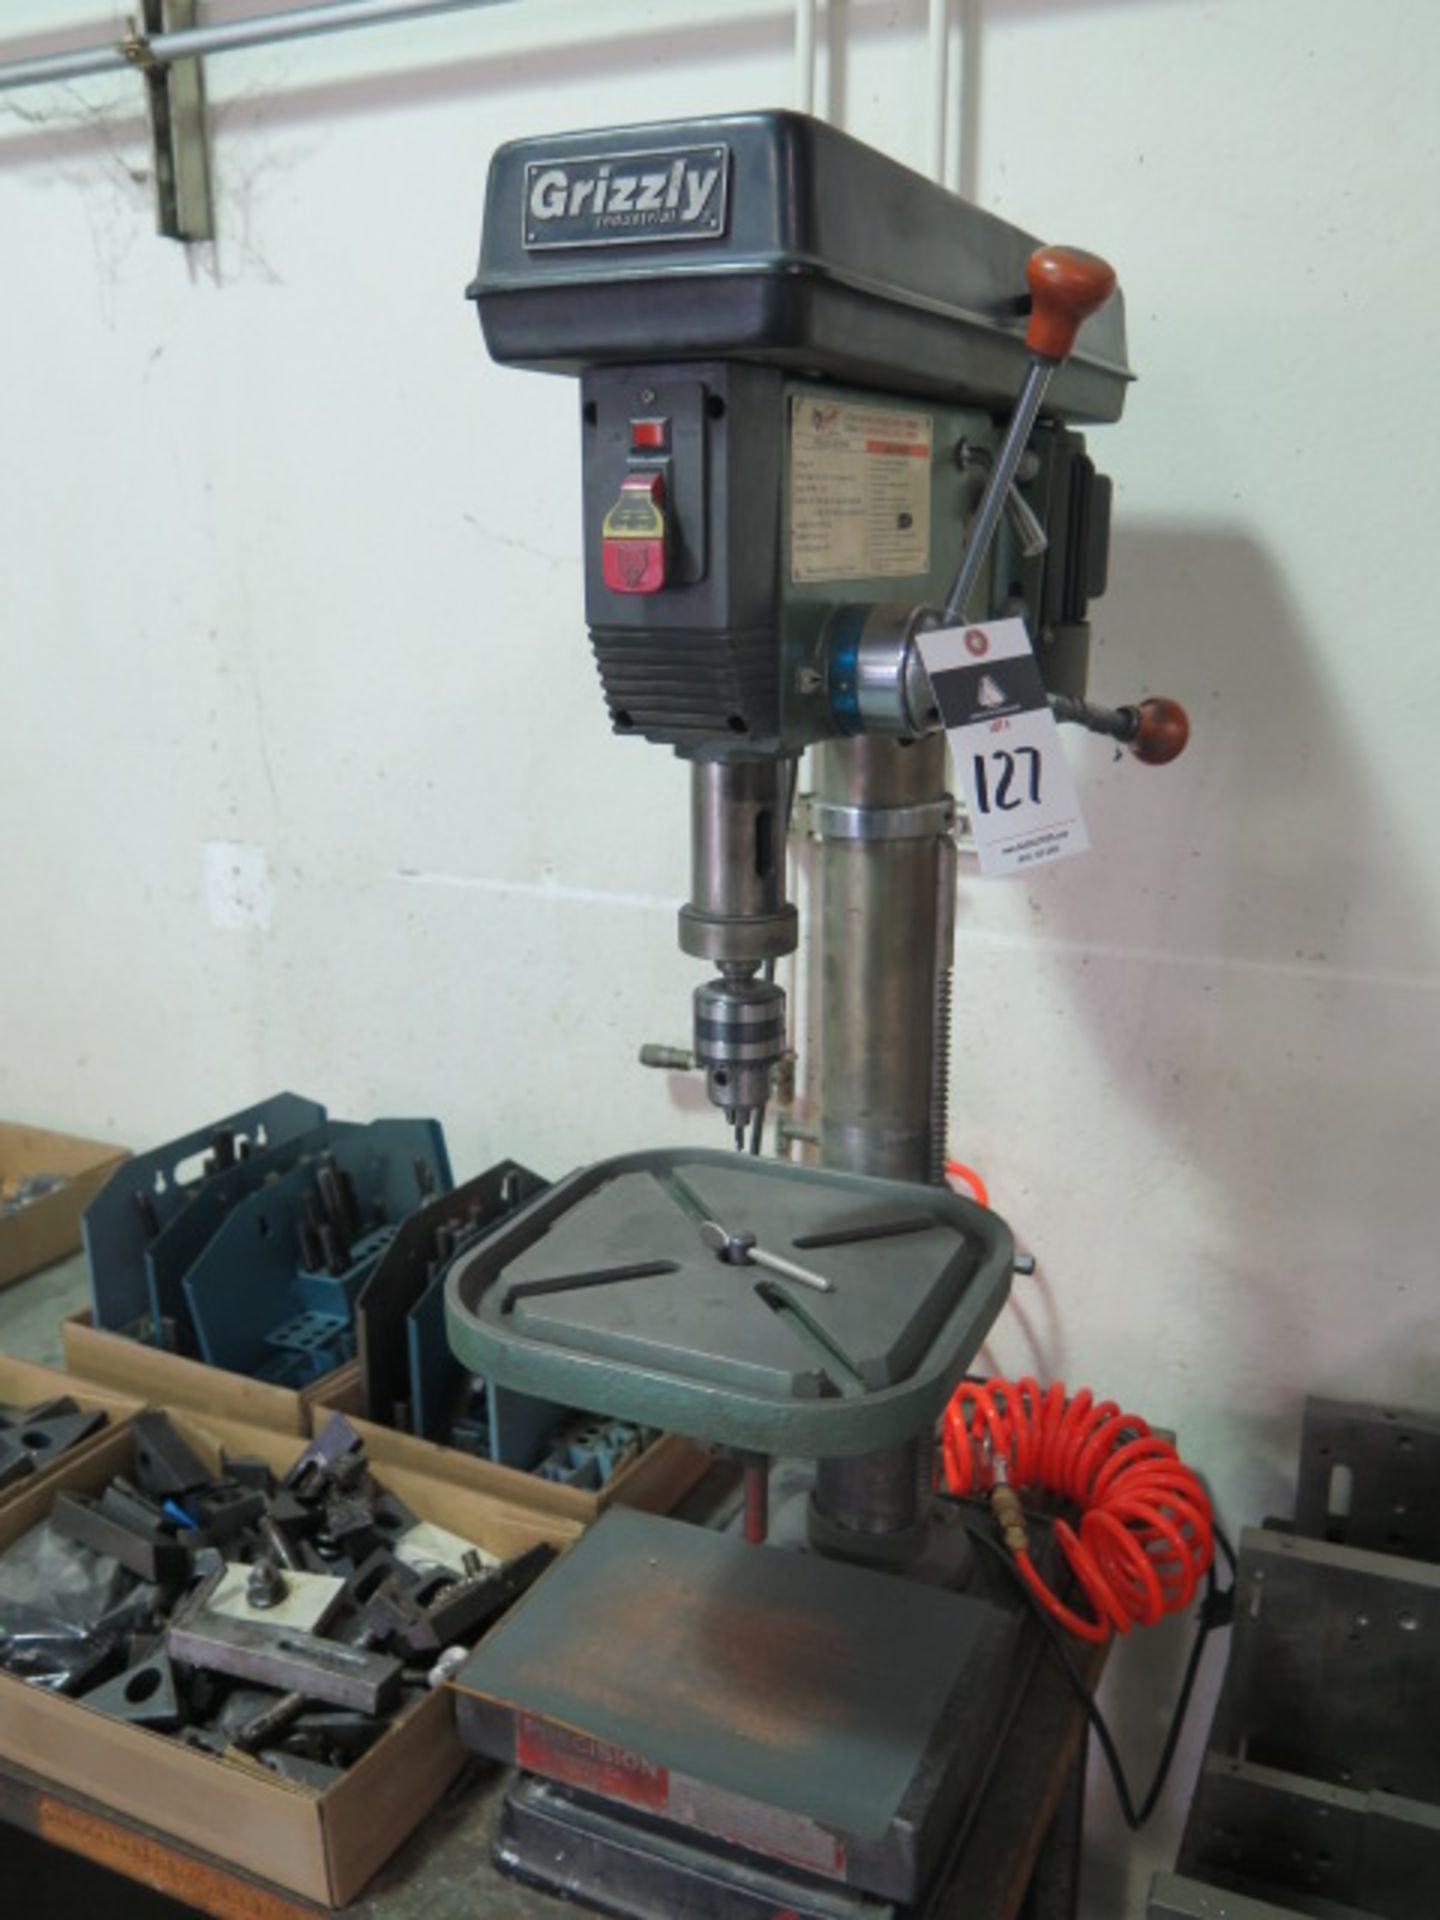 Grizzly mdl. G7943 Bench Model Drill Press